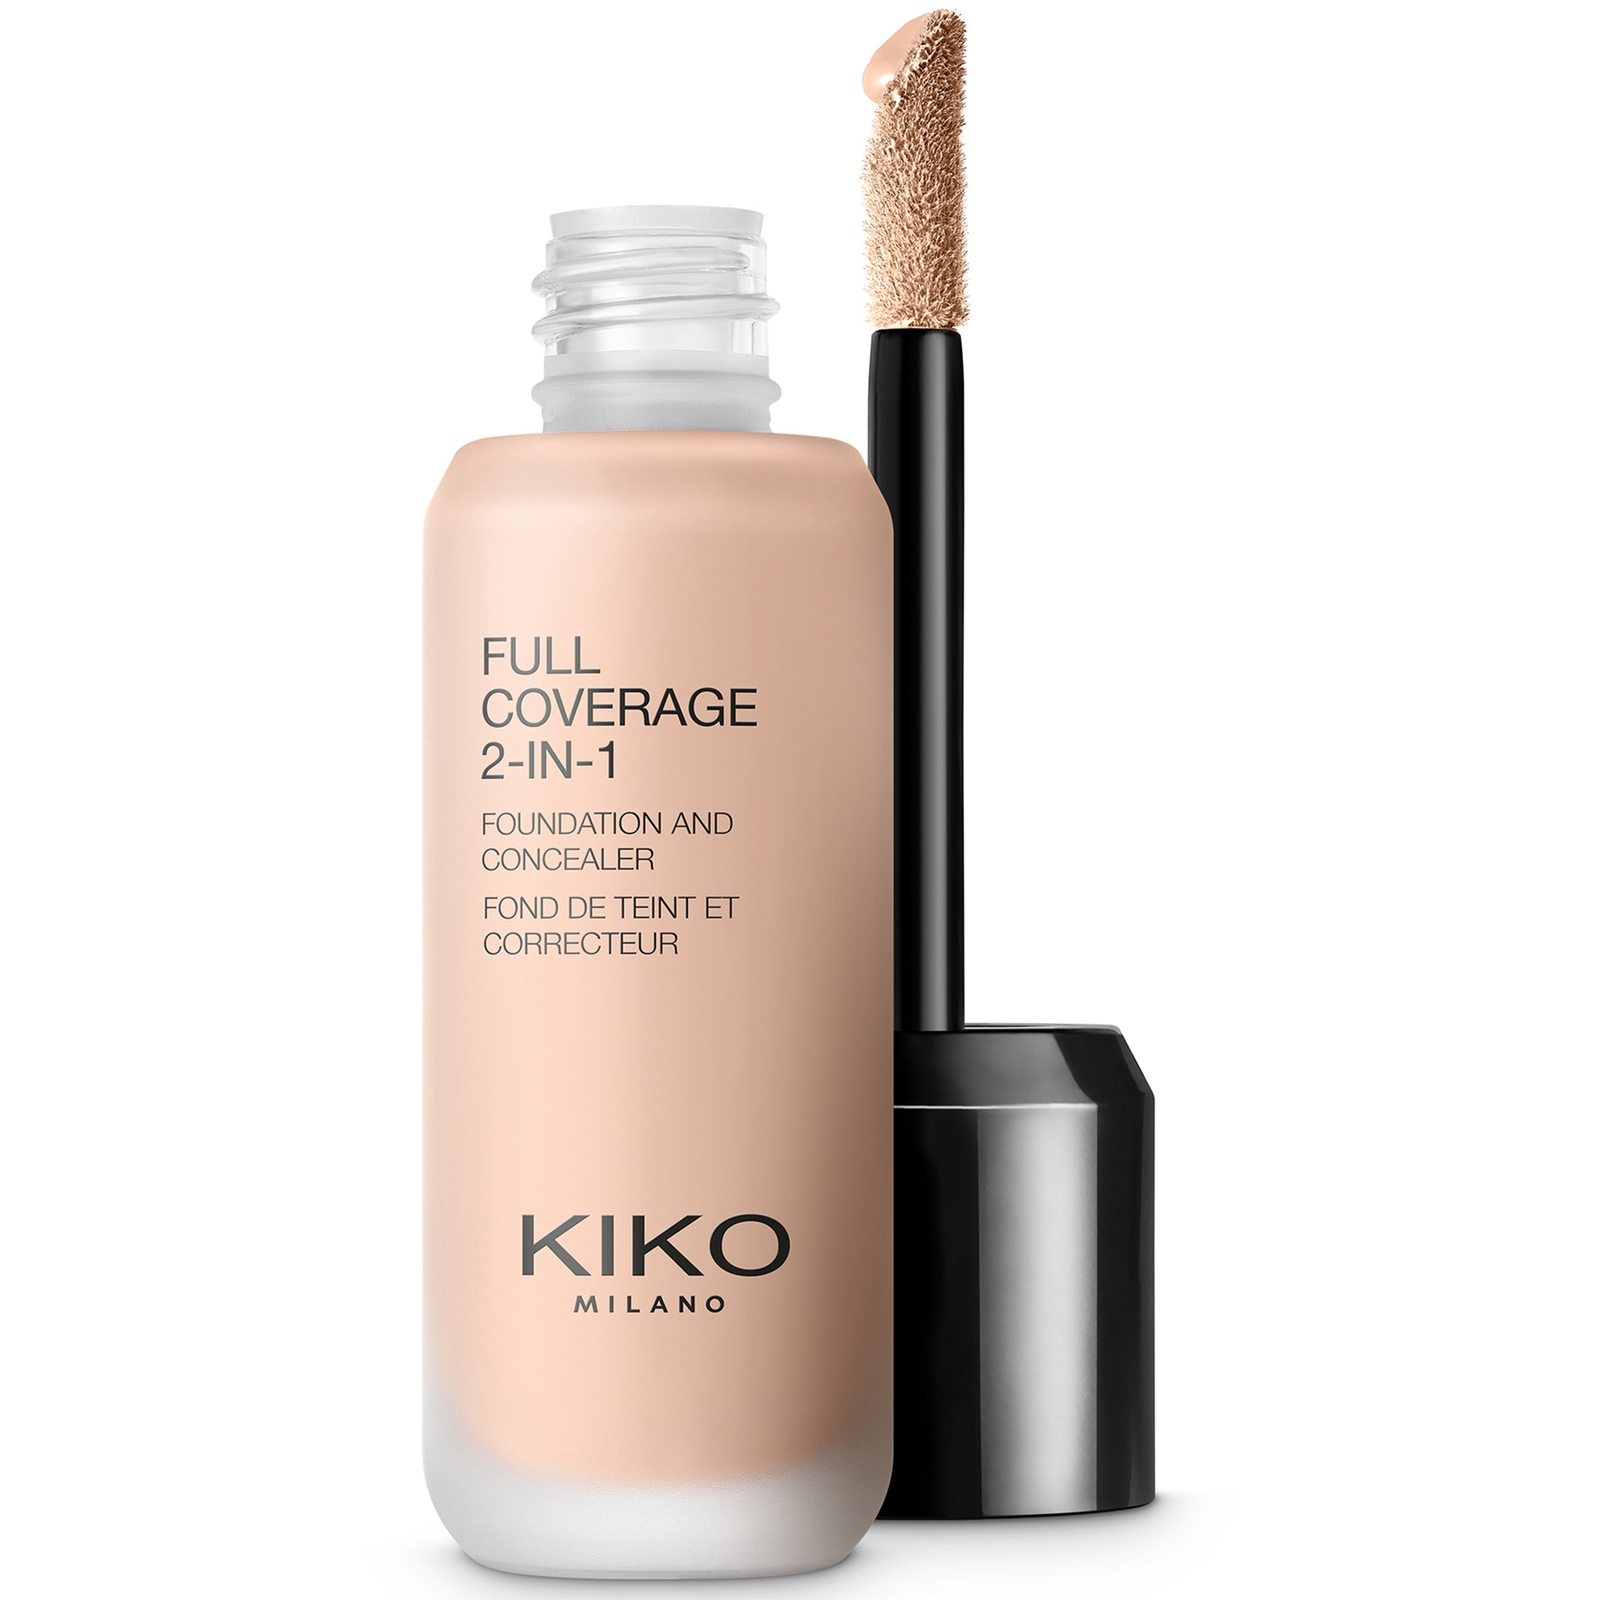 KIKO Milano Full Coverage 2-in-1 Foundation and Concealer 25ml (Various Shades) - 05 Cold Rose